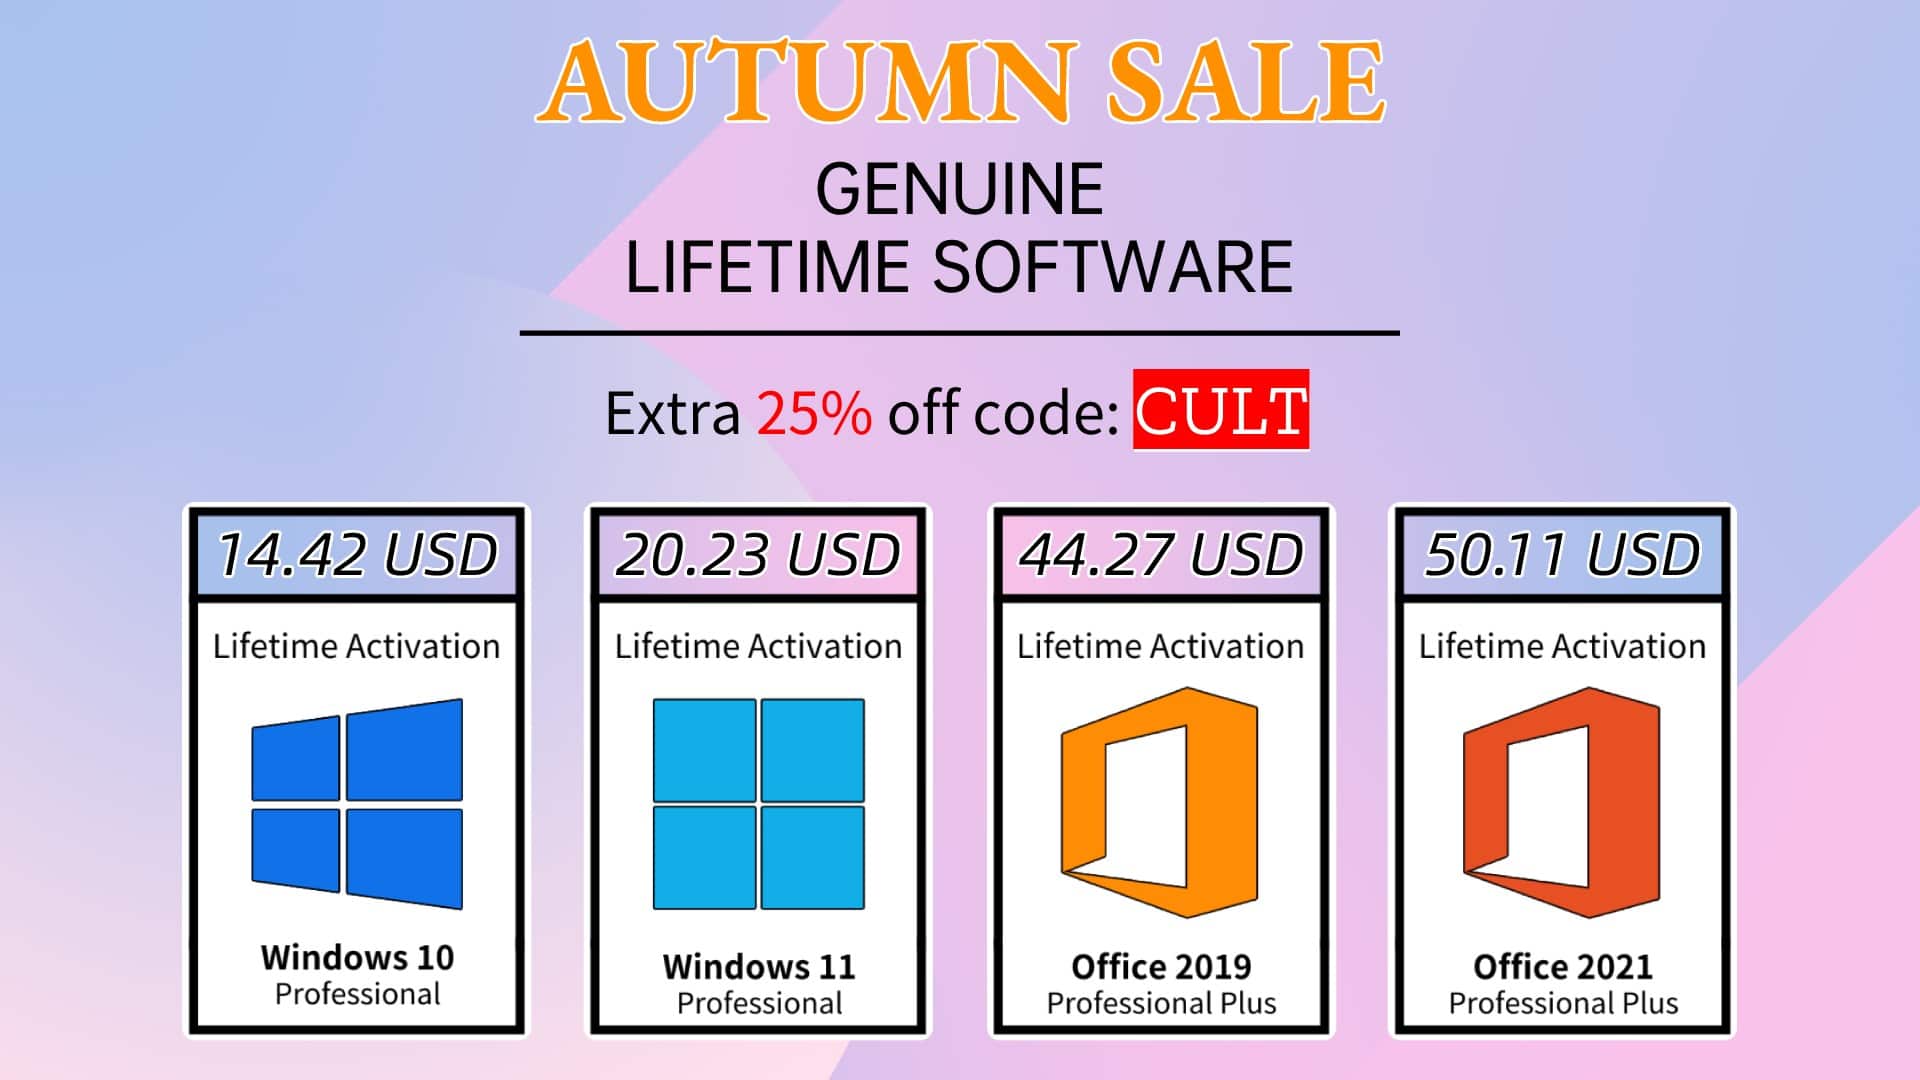 If you want to save money on genuine Microsoft software, visit SCDKey.com using the link above.  And don't forget to enter promo code CULT to get extra savings.